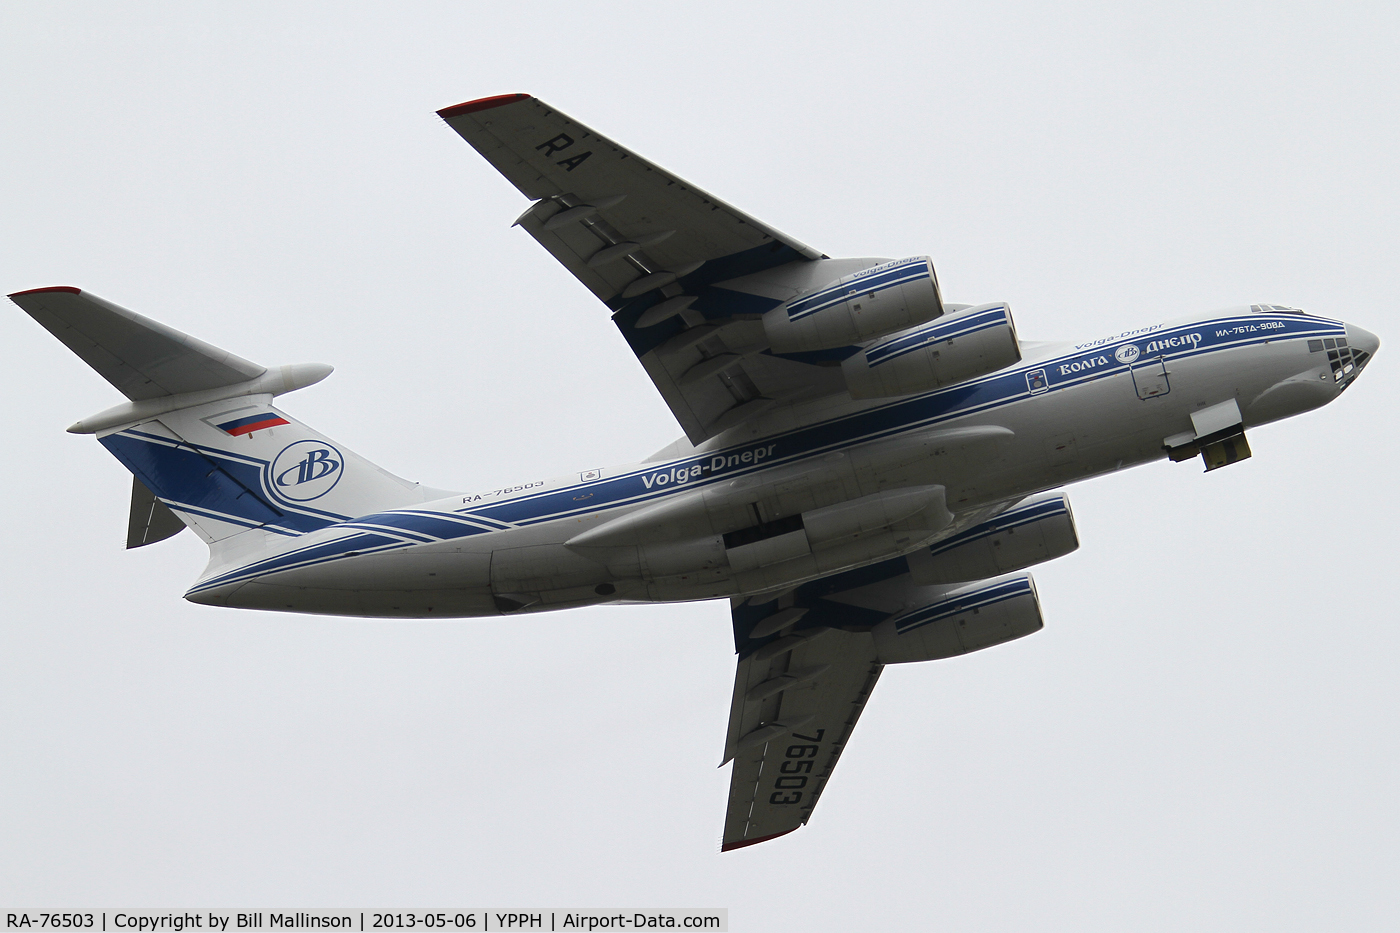 RA-76503, 2011 Ilyushin IL-76TD-90VD C/N 2093422748, away from 21... headed for Africa